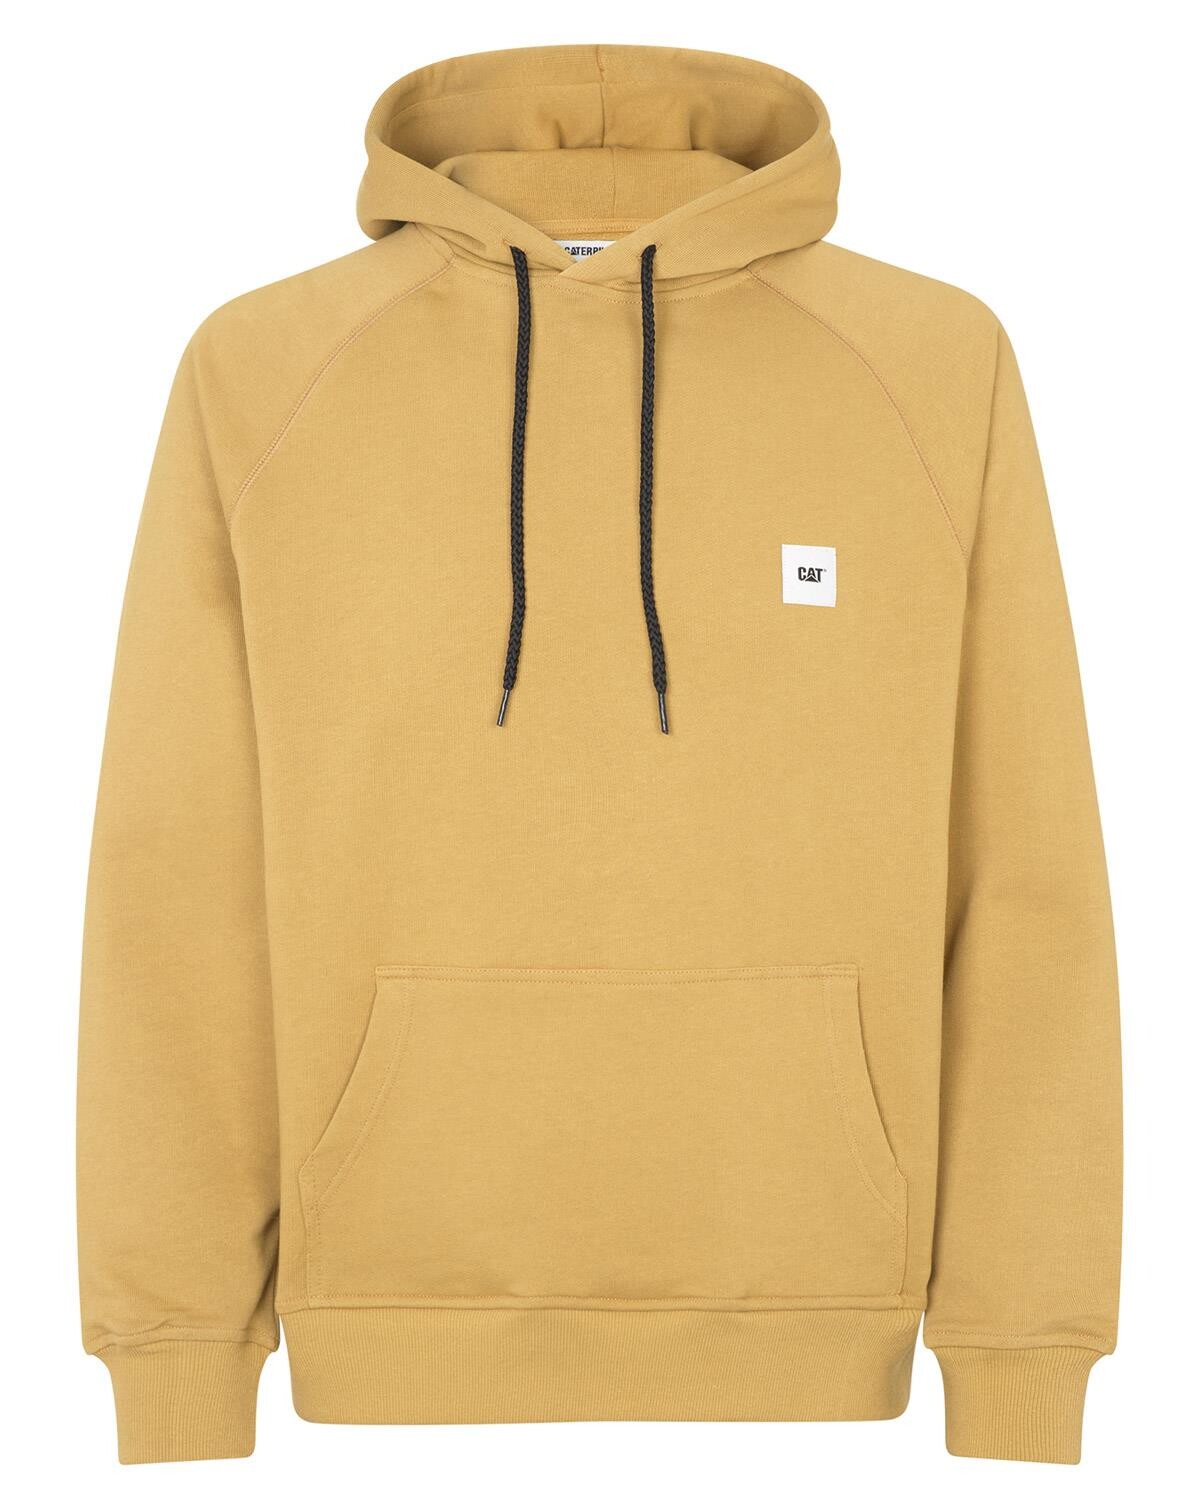 Caterpillar Basic Cat Labeled Hoodie (Sand, S)